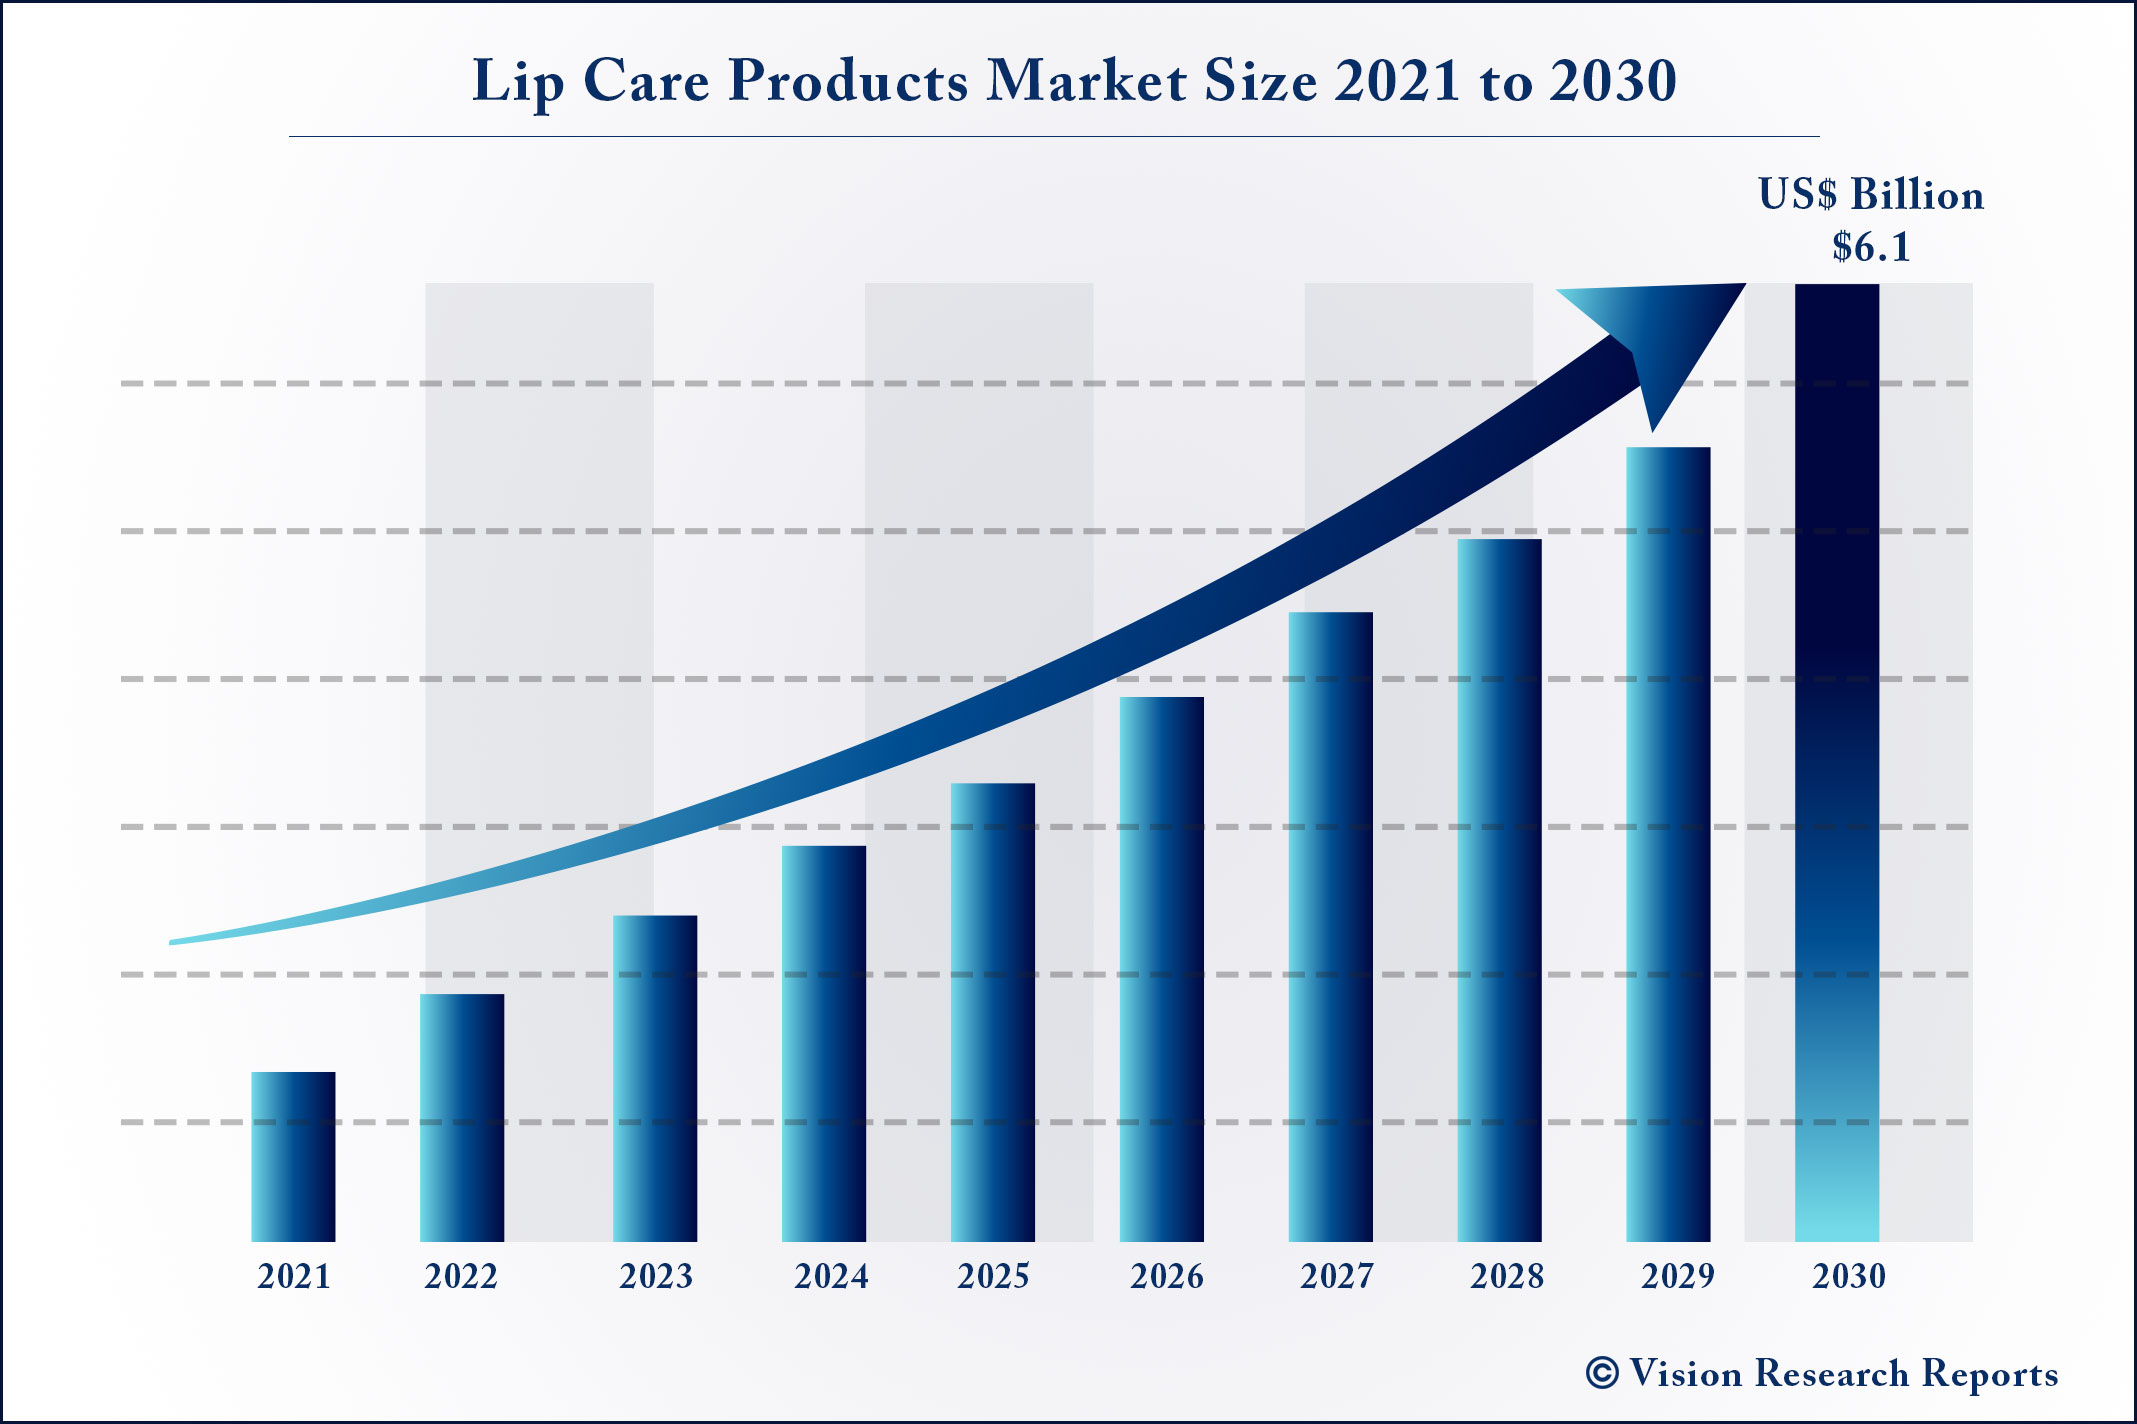 Lip Care Products Market Size 2021 to 2030